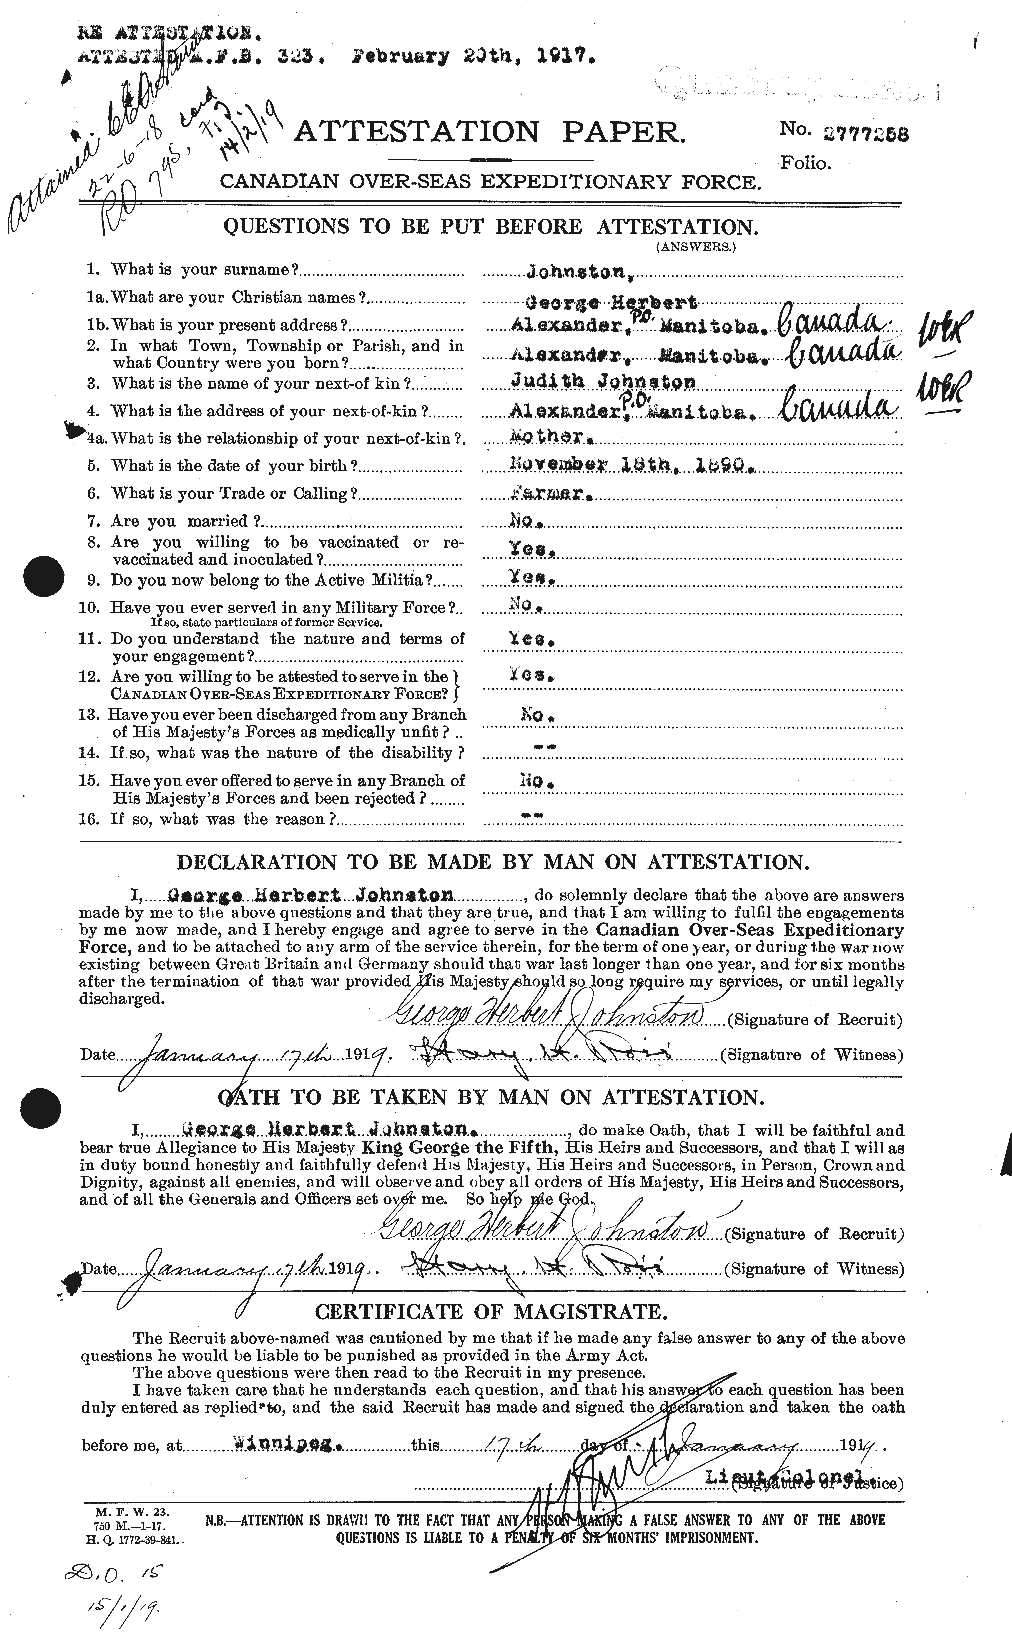 Personnel Records of the First World War - CEF 419428a